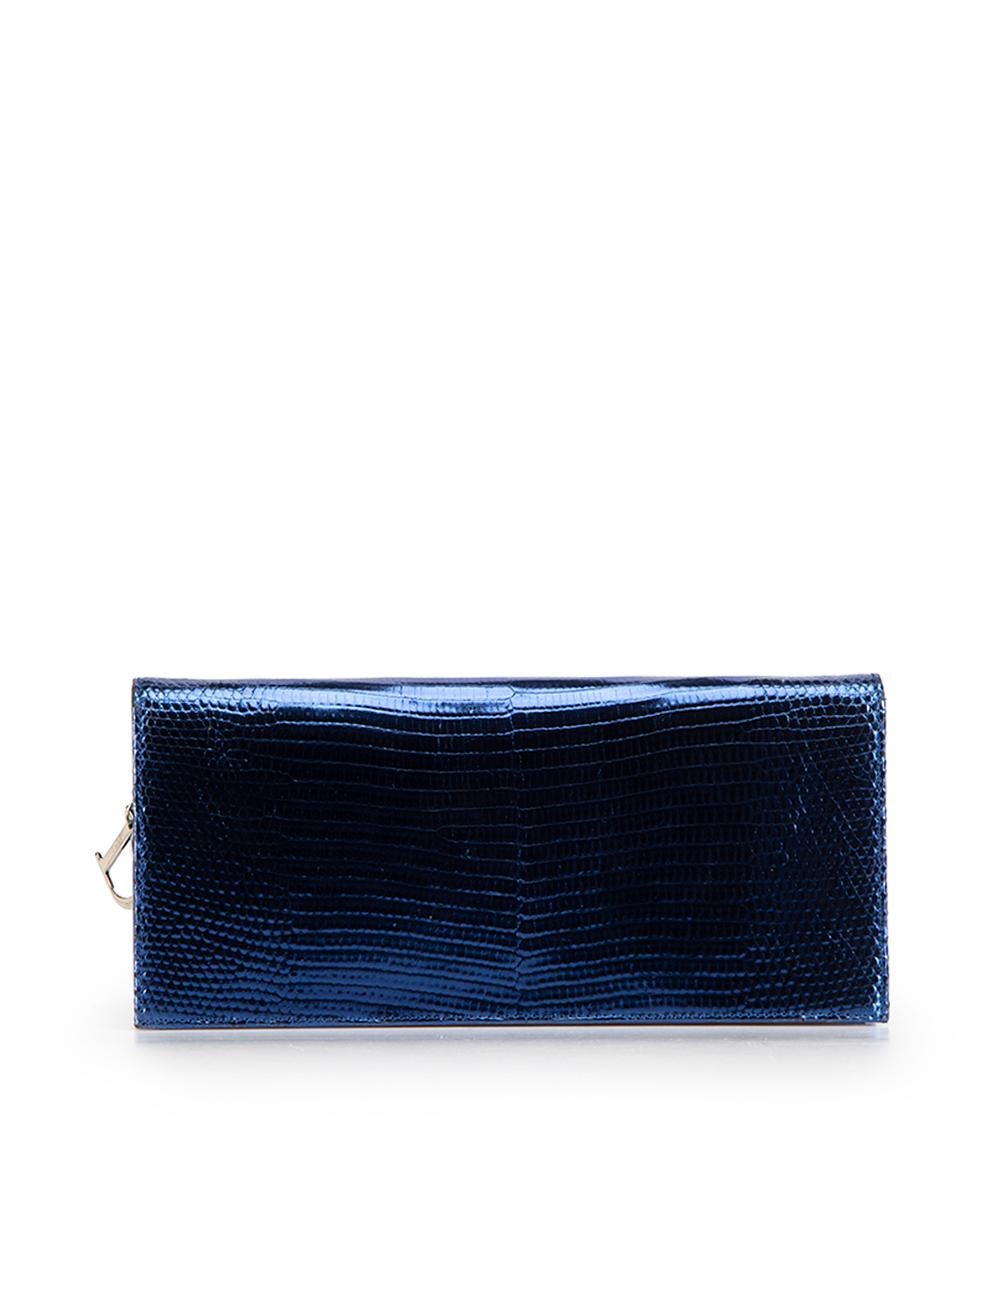 Dior Women's Blue Leather Metallic Chain Evening Clutch In Good Condition In London, GB